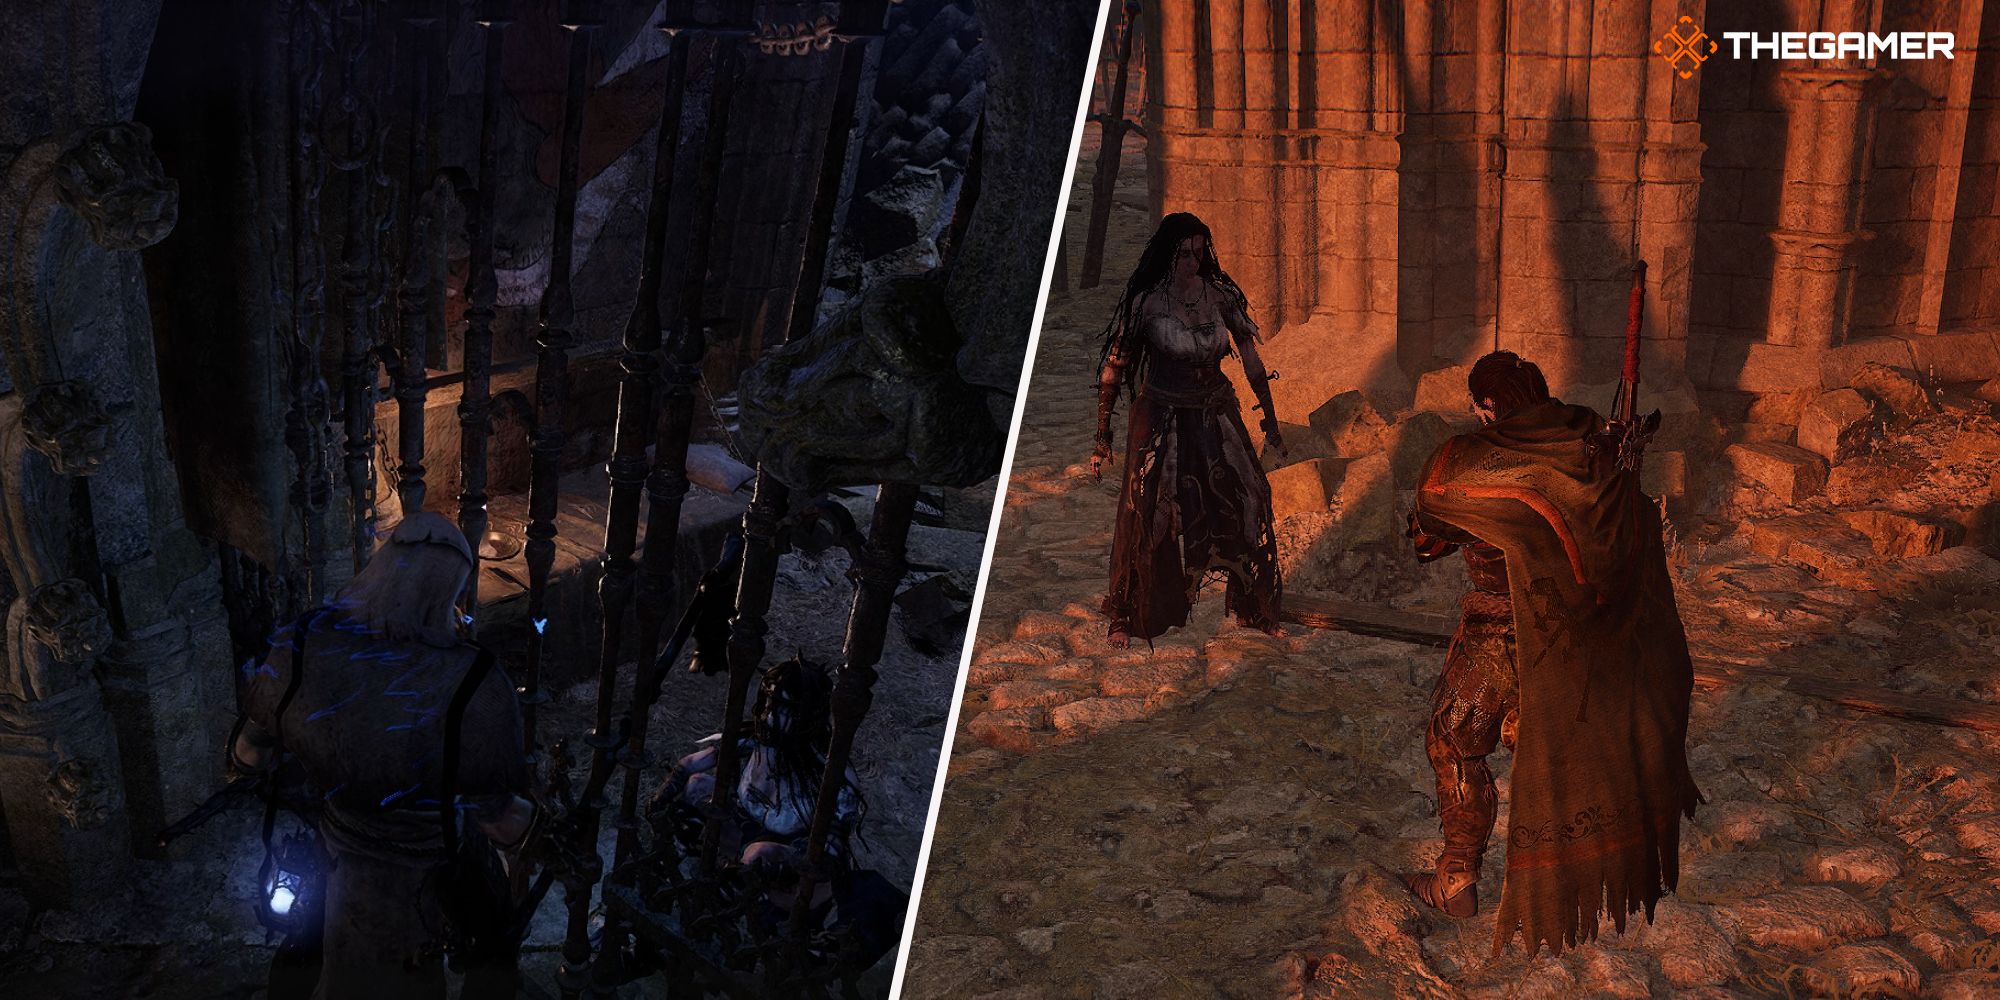 Right: Player standing in front of The Tortured Prisoner at Pieta boss entrance - Left: Player standing in front of The Tortured Prisoner where she is still locked in her cell Lords of the Fallen